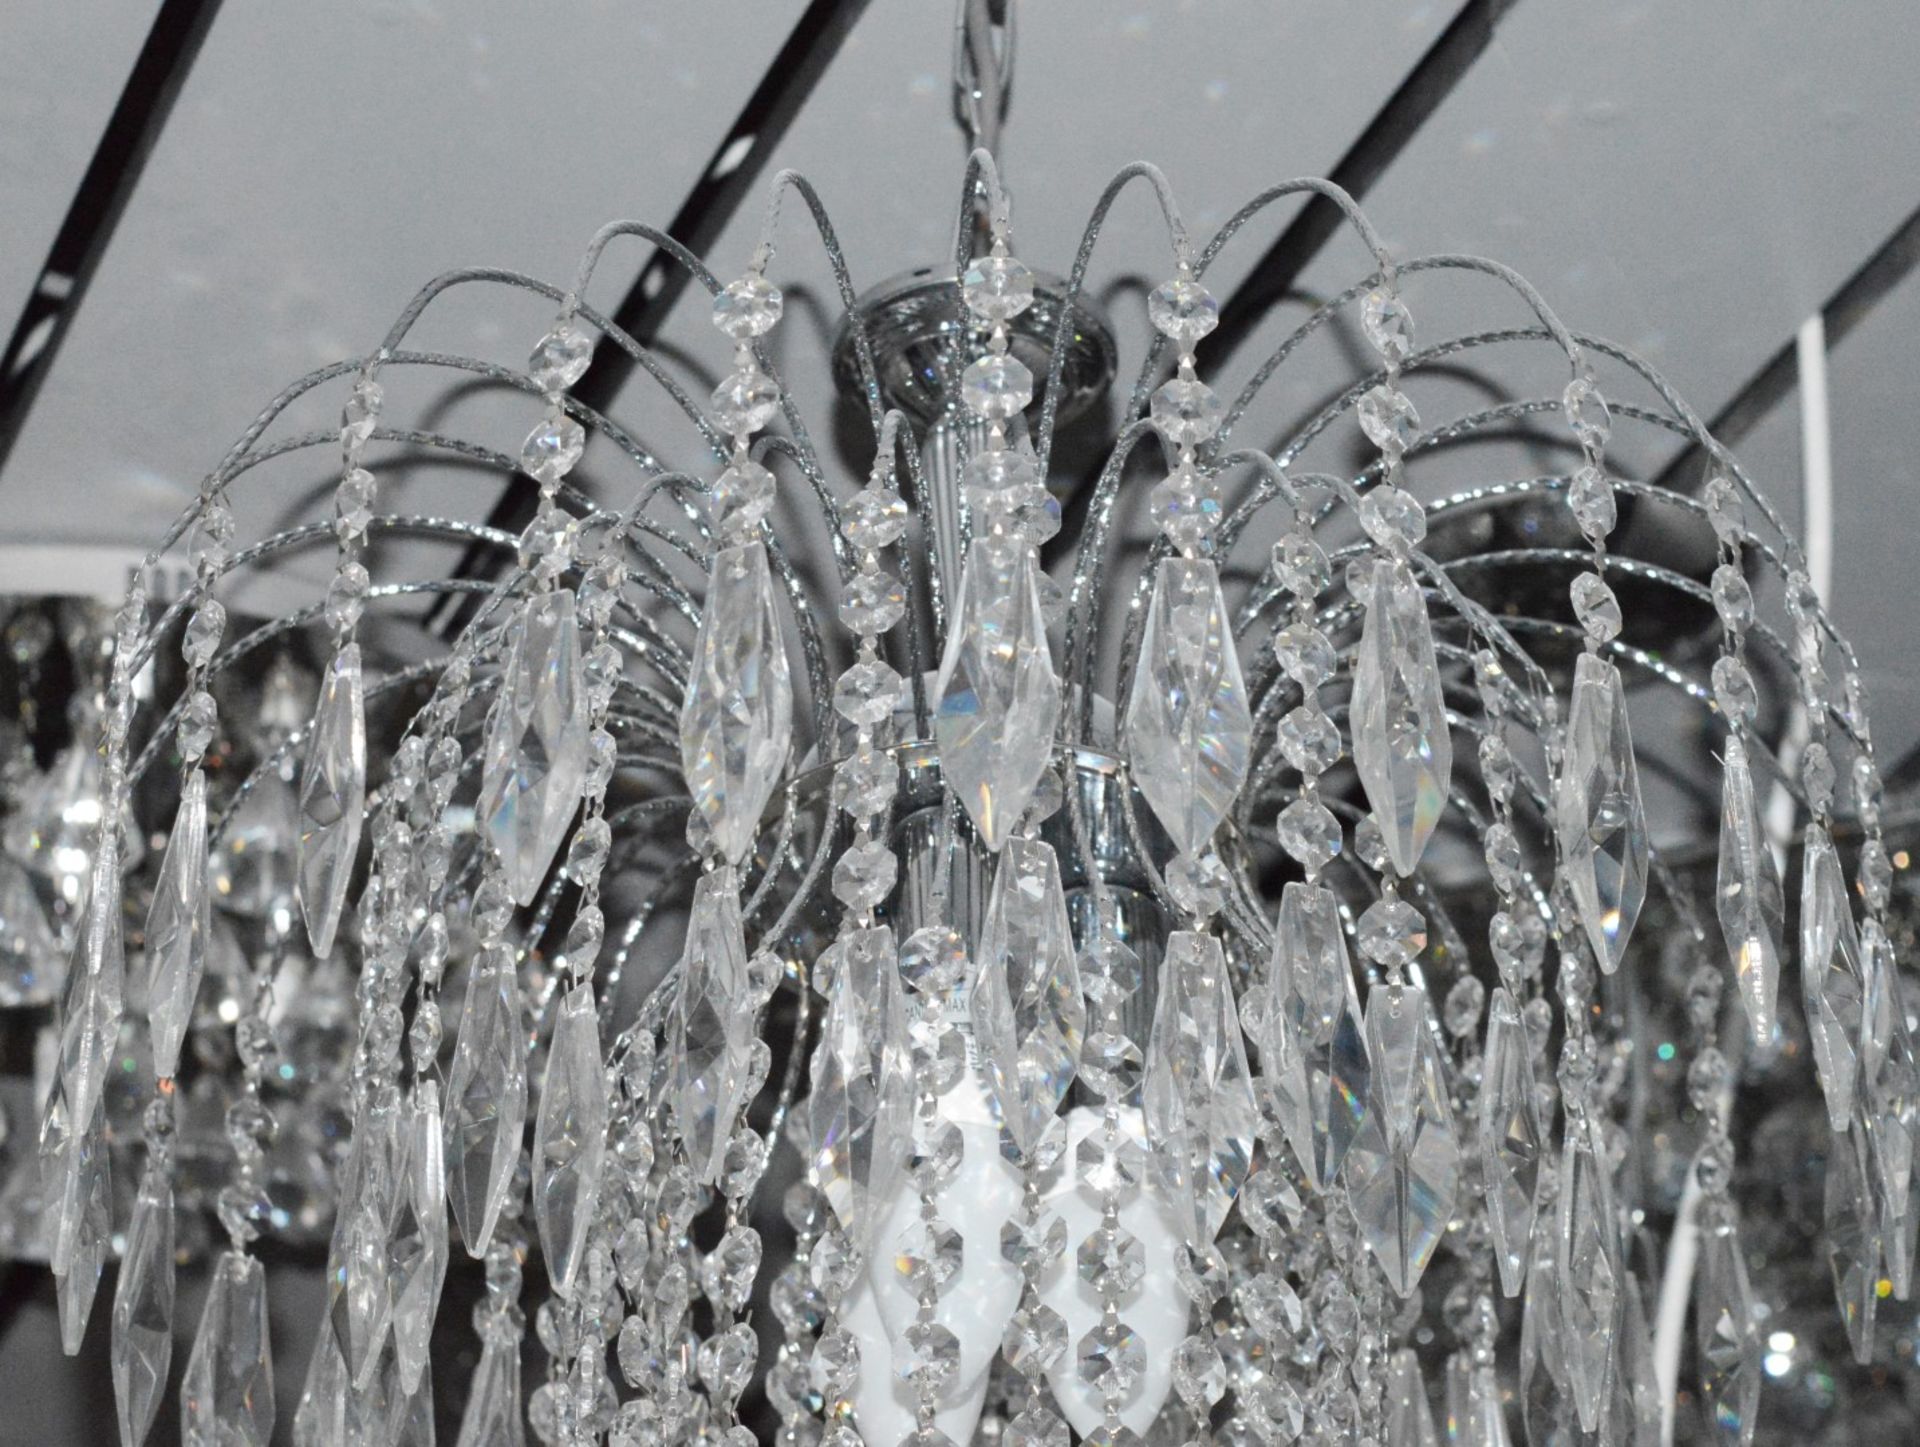 1 x WATERFALL Chrome 3-Light Ceiling Fitting With Crystal Button & Drops Decoration - RRP £256.80 - Image 2 of 4